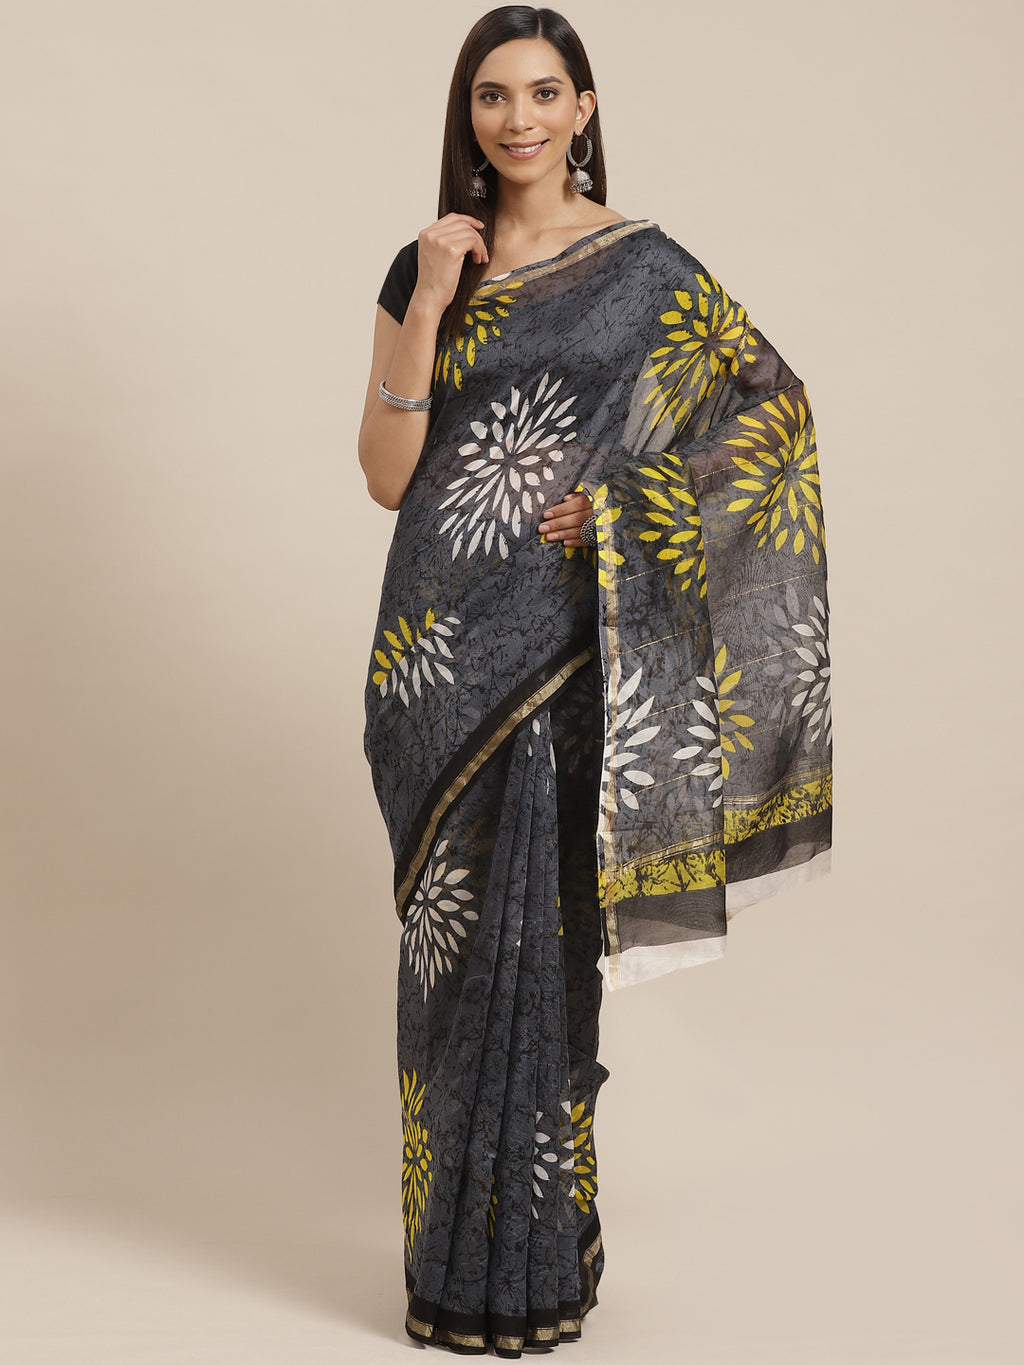 Grey and Yellow, Kalakari India Pure Cotton Handblock Printed Saree and Blouse RCBGSA0013-Saree-Kalakari India-RCBGSA0013-Cotton, Geographical Indication, Hand Block, Hand Crafted, Heritage Prints, Natural Dyes, Red, Sarees, Sustainable Fabrics, Woven, Yellow-[Linen,Ethnic,wear,Fashionista,Handloom,Handicraft,Indigo,blockprint,block,print,Cotton,Chanderi,Blue, latest,classy,party,bollywood,trendy,summer,style,traditional,formal,elegant,unique,style,hand,block,print, dabu,booti,gift,present,glamo